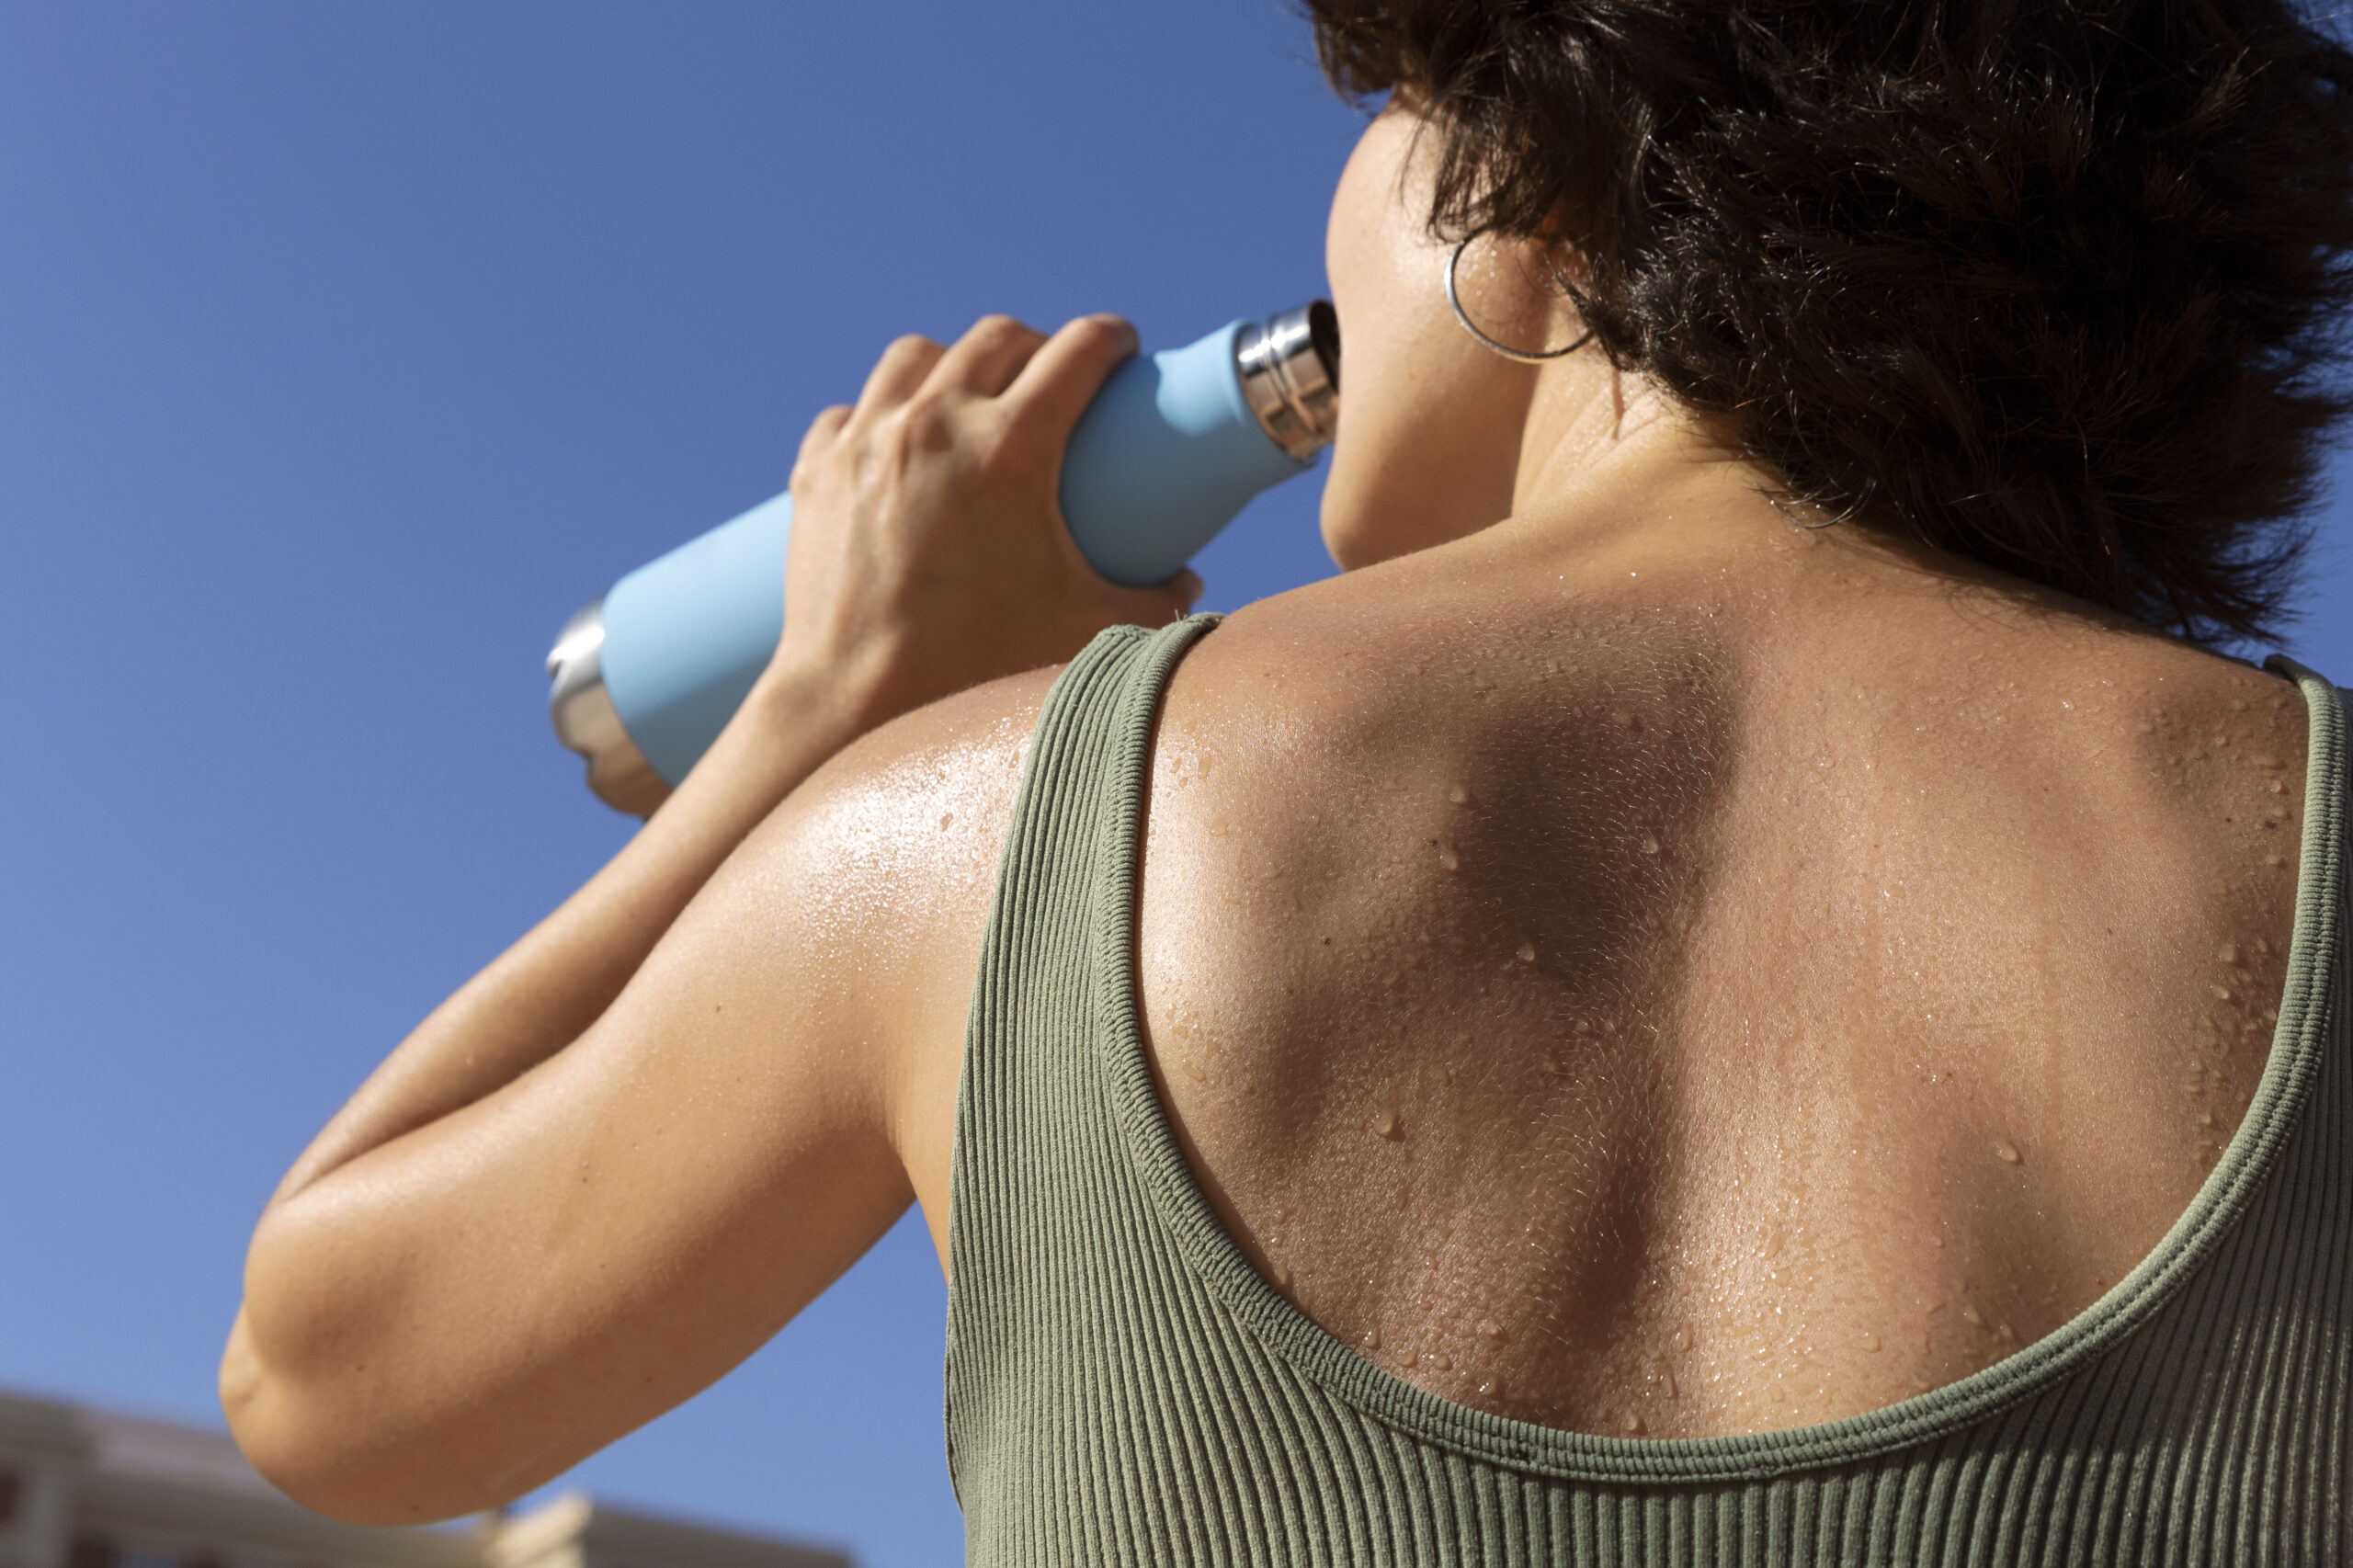 Sweating It Out The Surprising Health Benefits of Perspiration You Need To Know